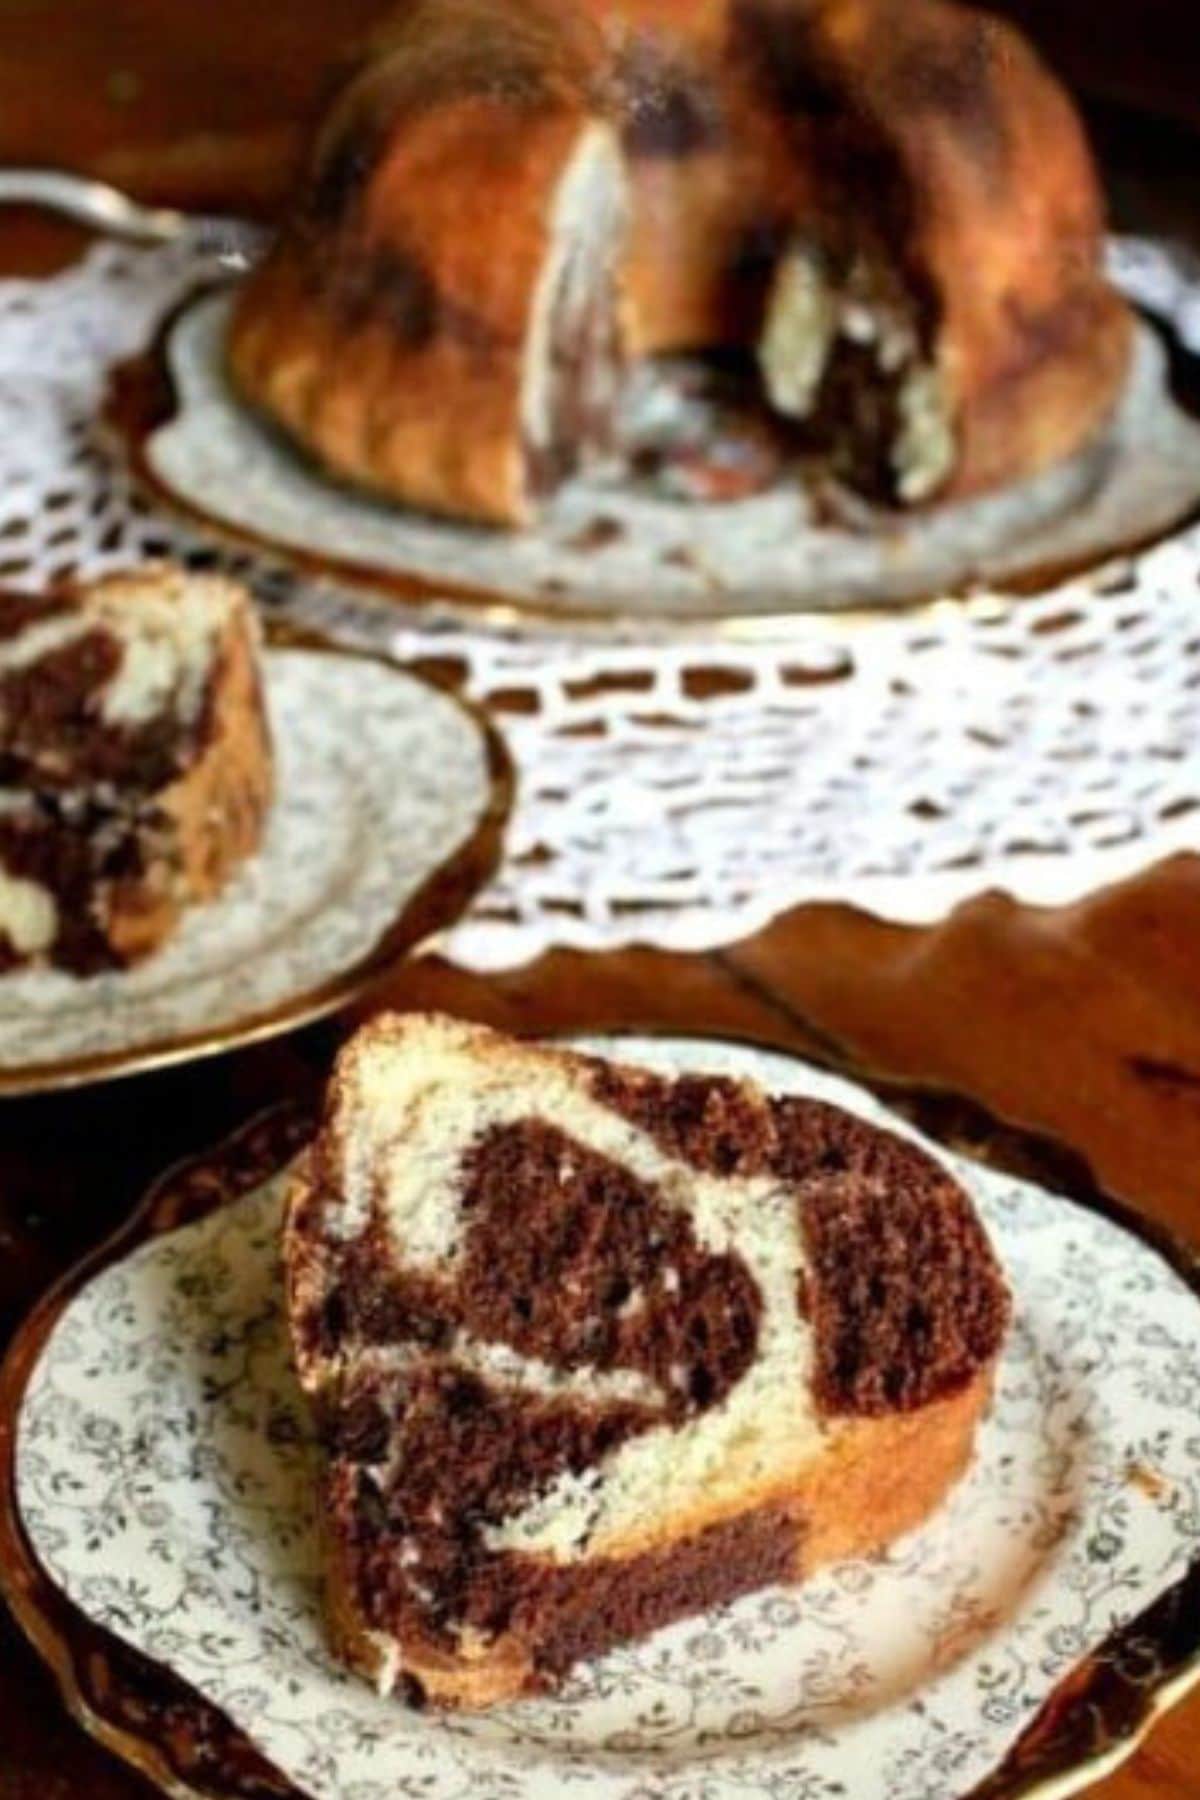 Marble pound cake cut and served.